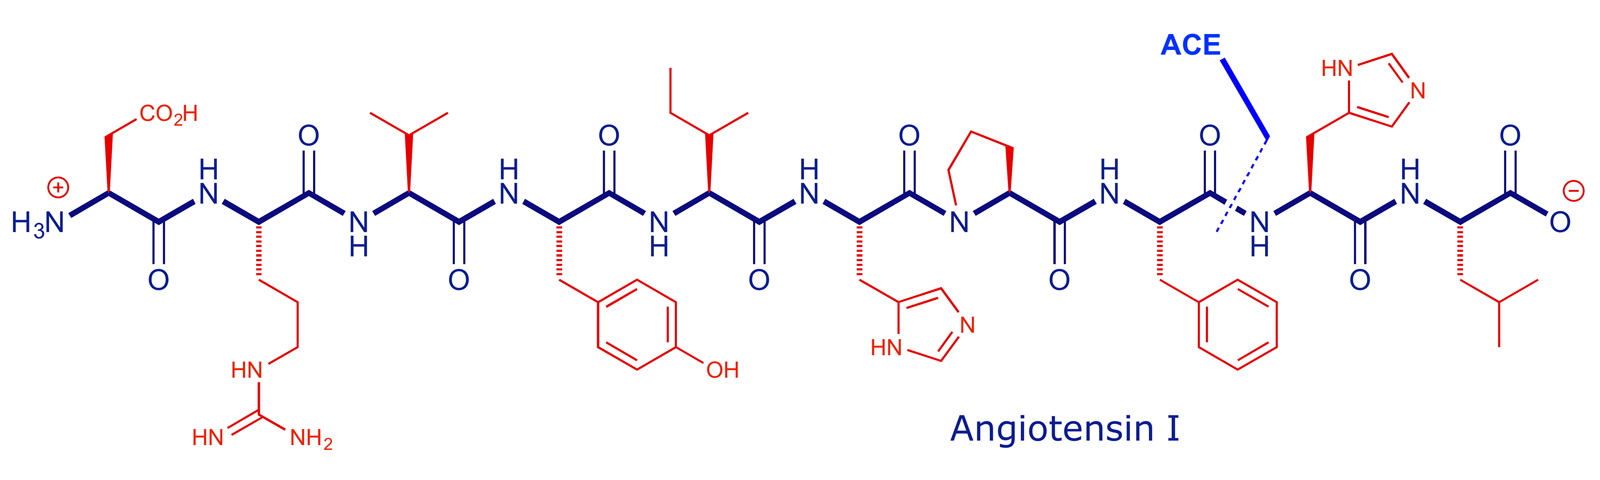 Full structure of angiotensin I showing the bond cleaved by ACE